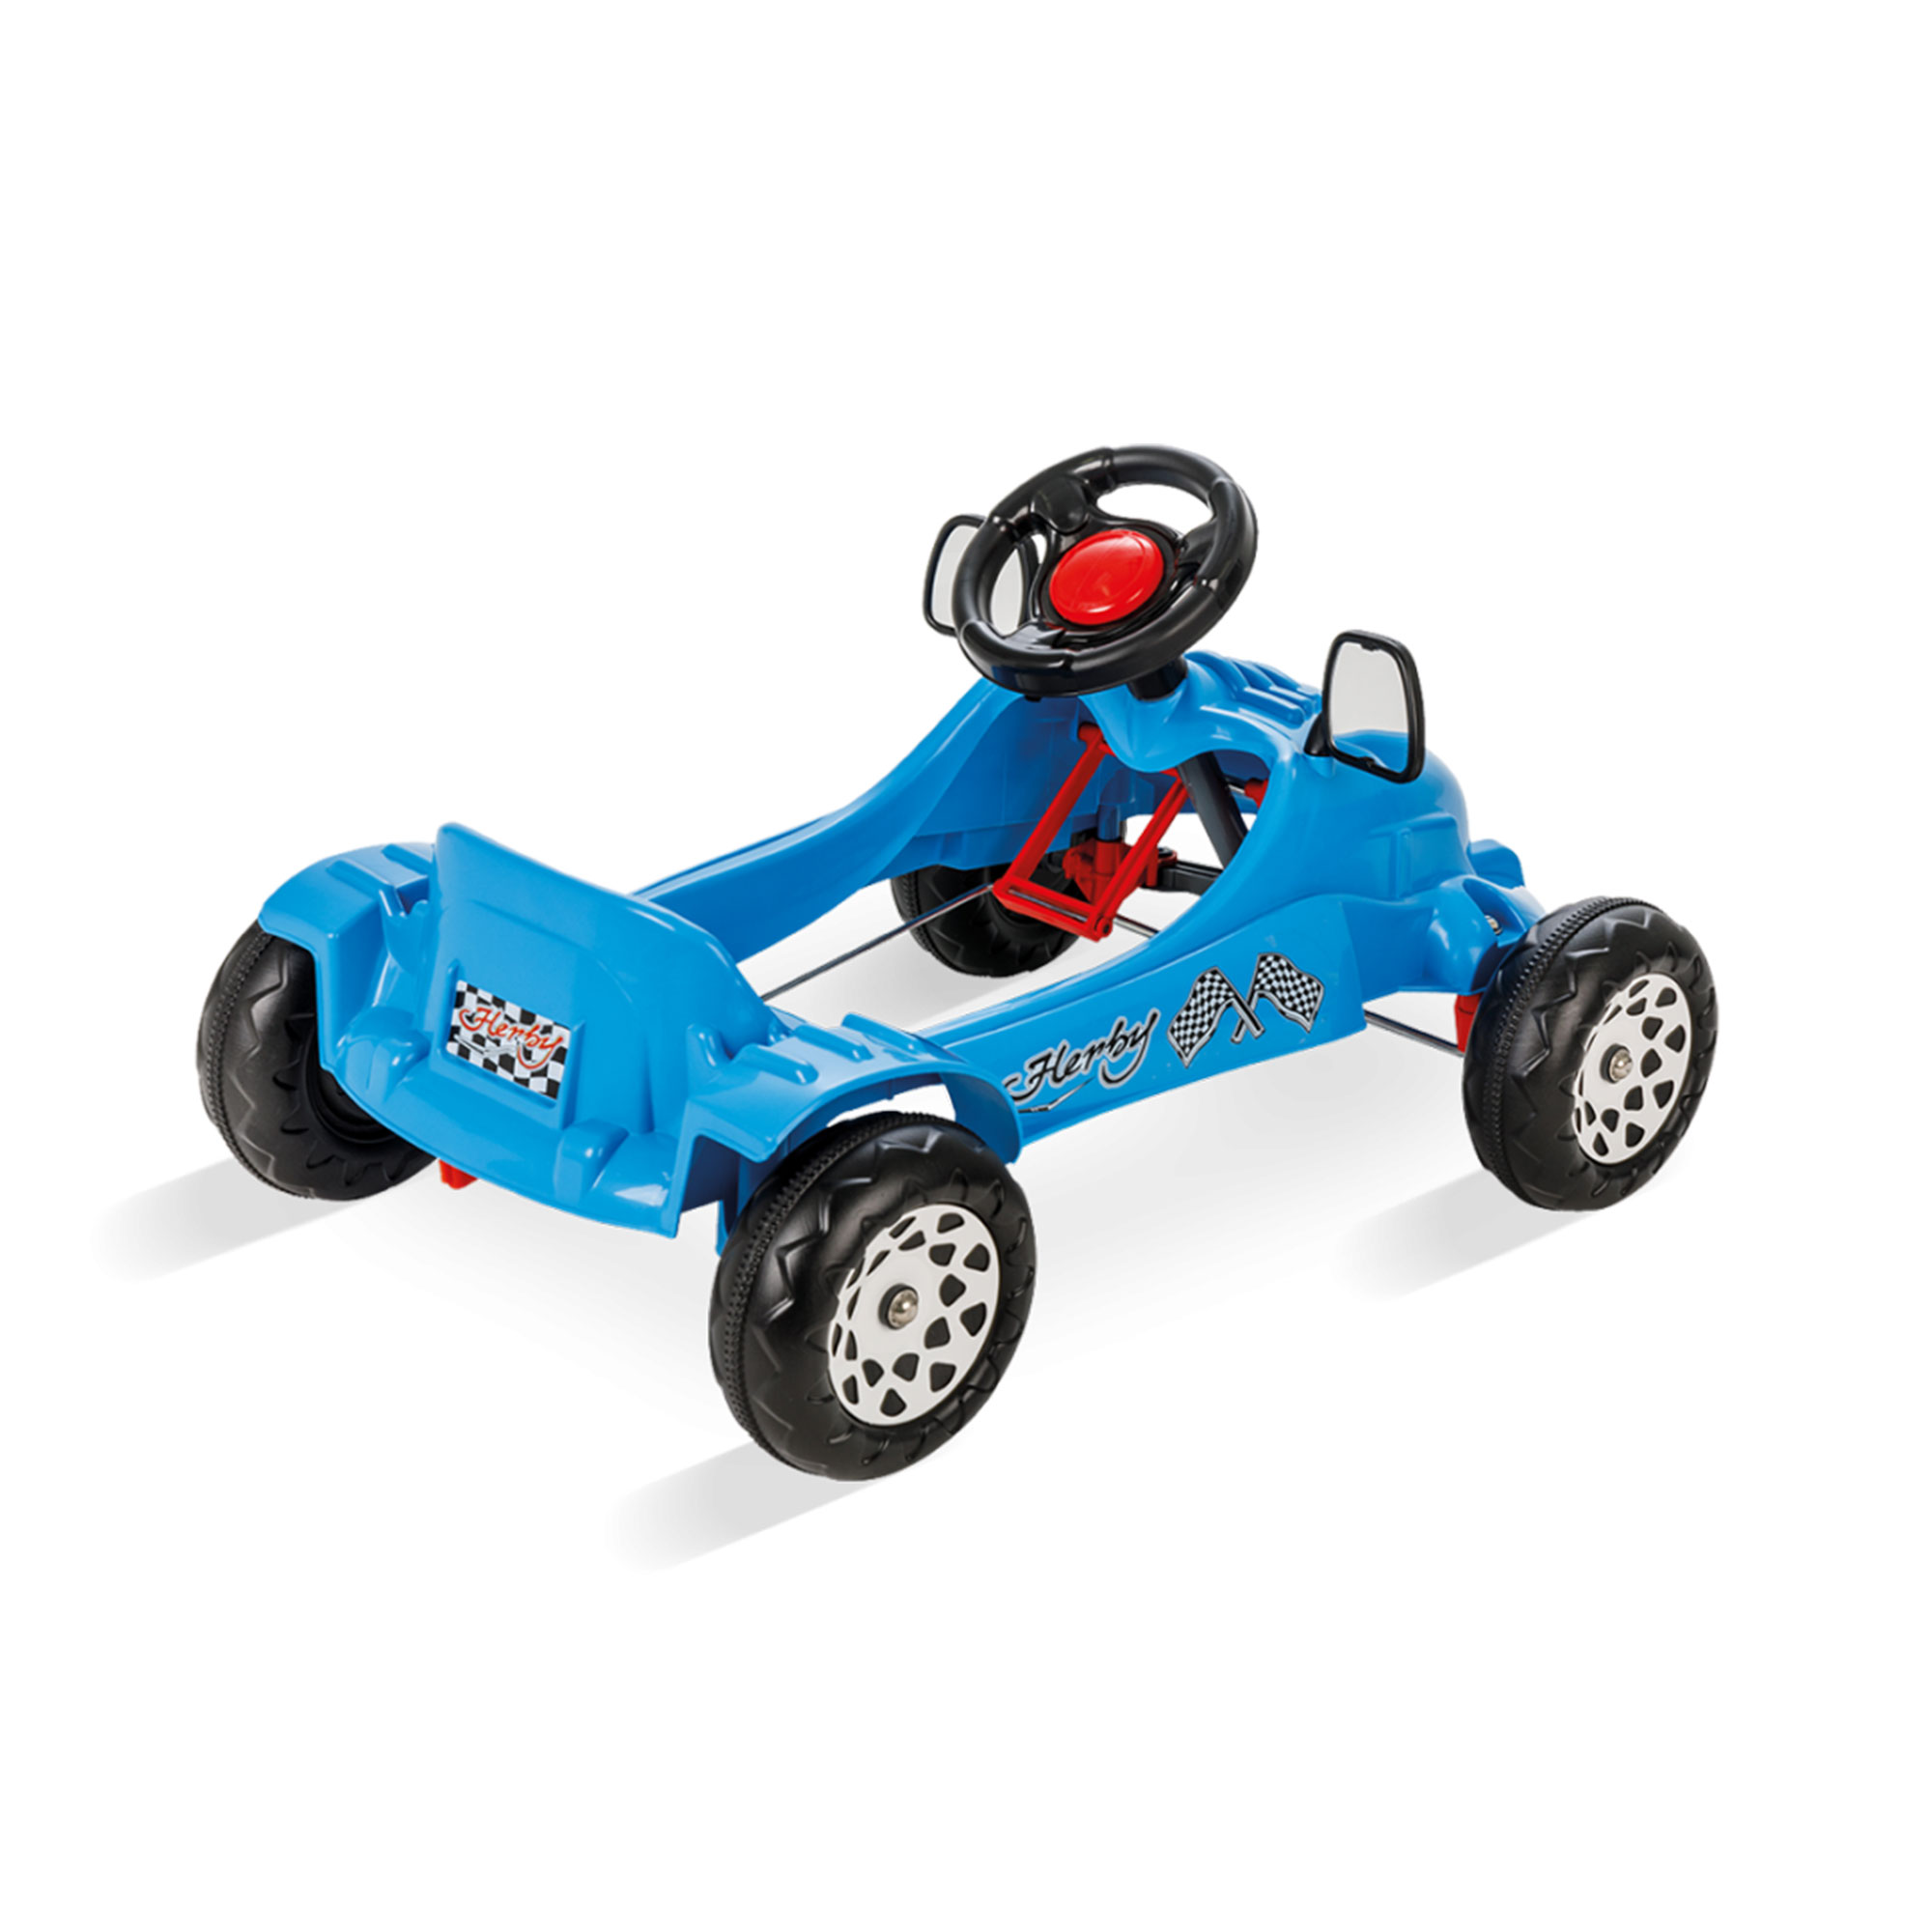 Pilsan Herby Pedal Car w/ Moving Mirrors and Horn for Ages 3 & Up, Blue - image 2 of 5